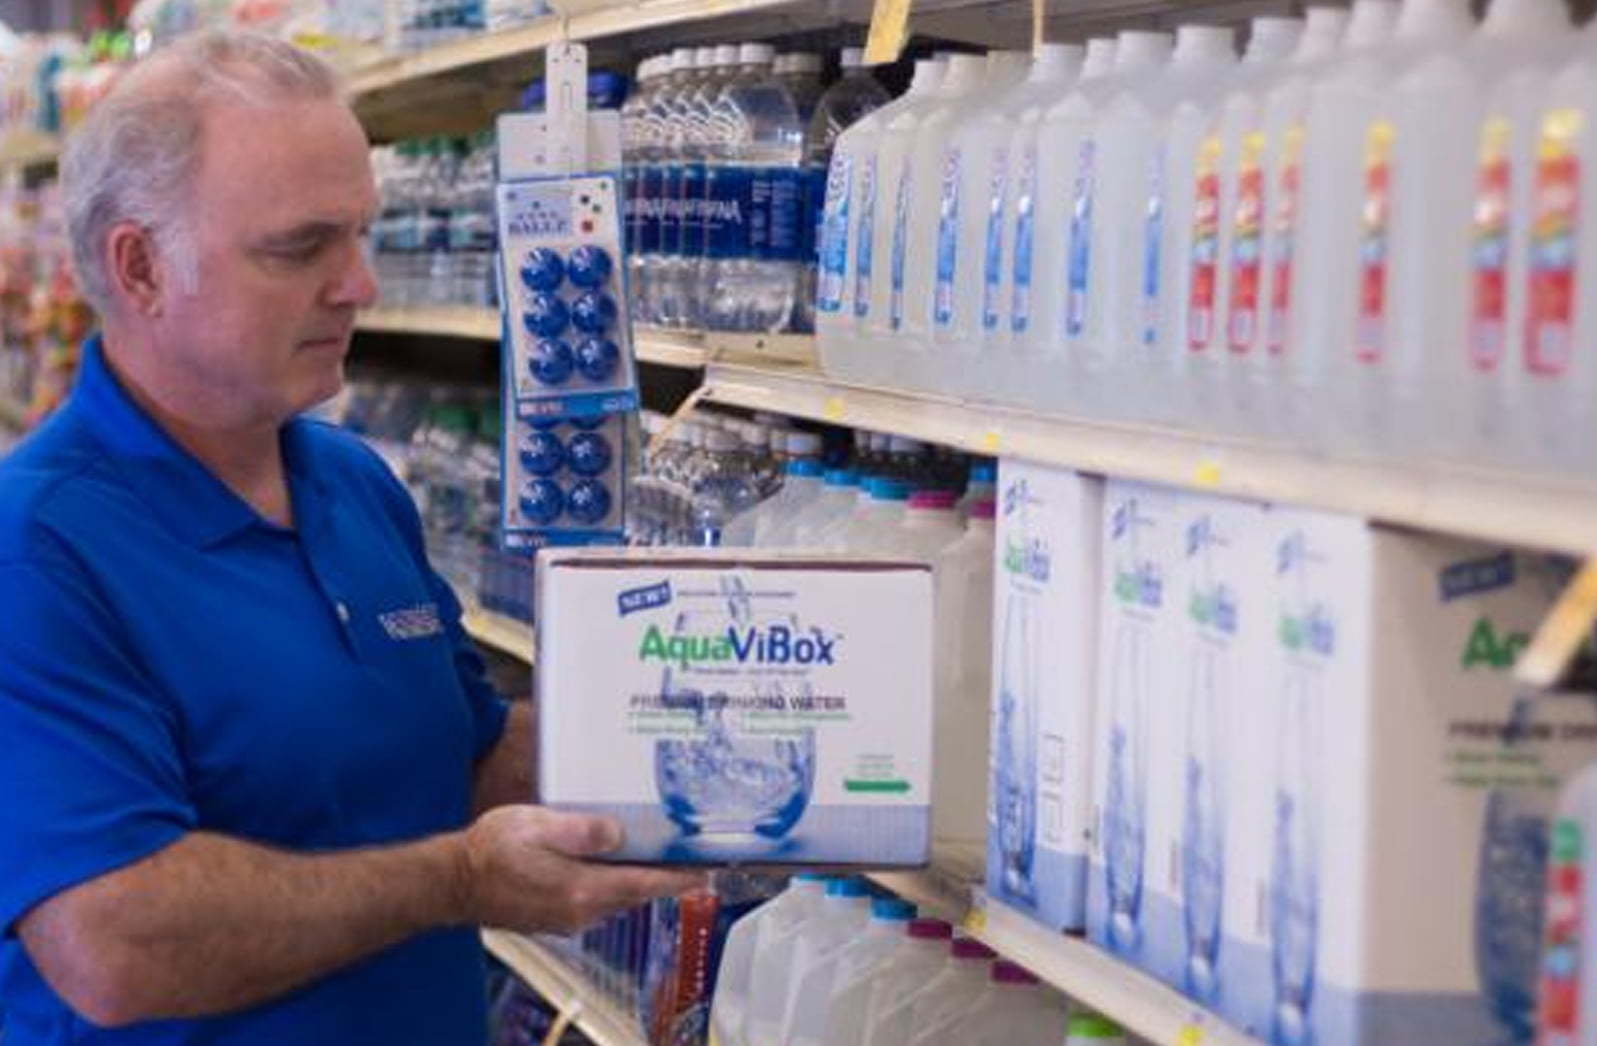 Bag-in-Box Packaging becomes an innovative solution for water 